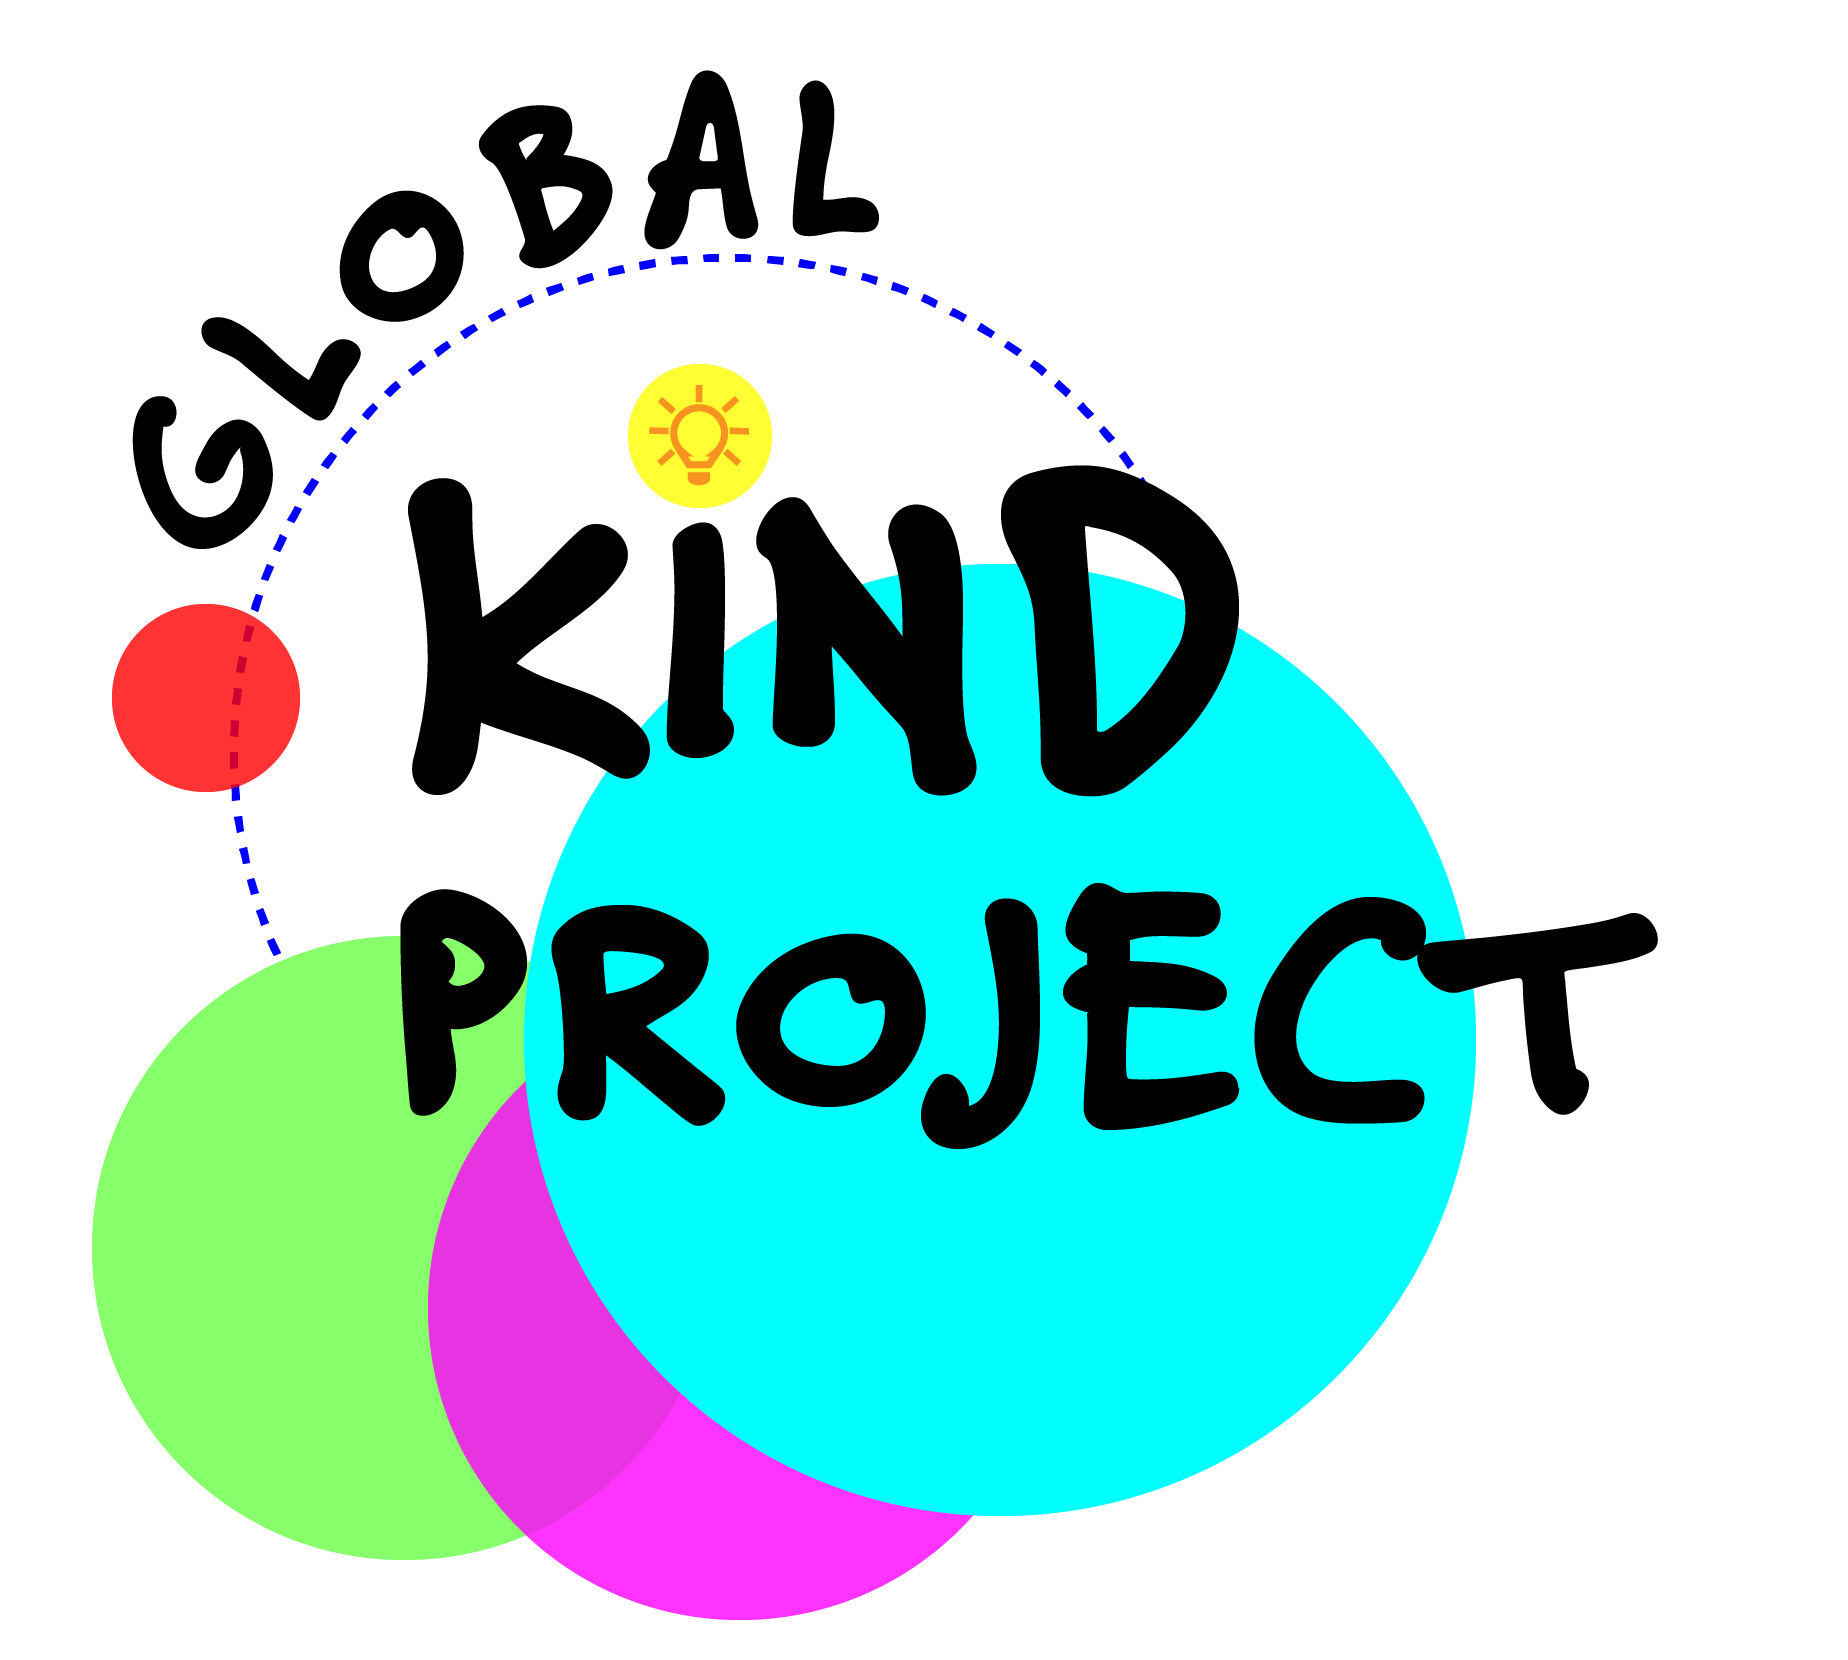 Kinds of programs. Kinds of Projects. Kinds of Kindness. A kind Project текст.